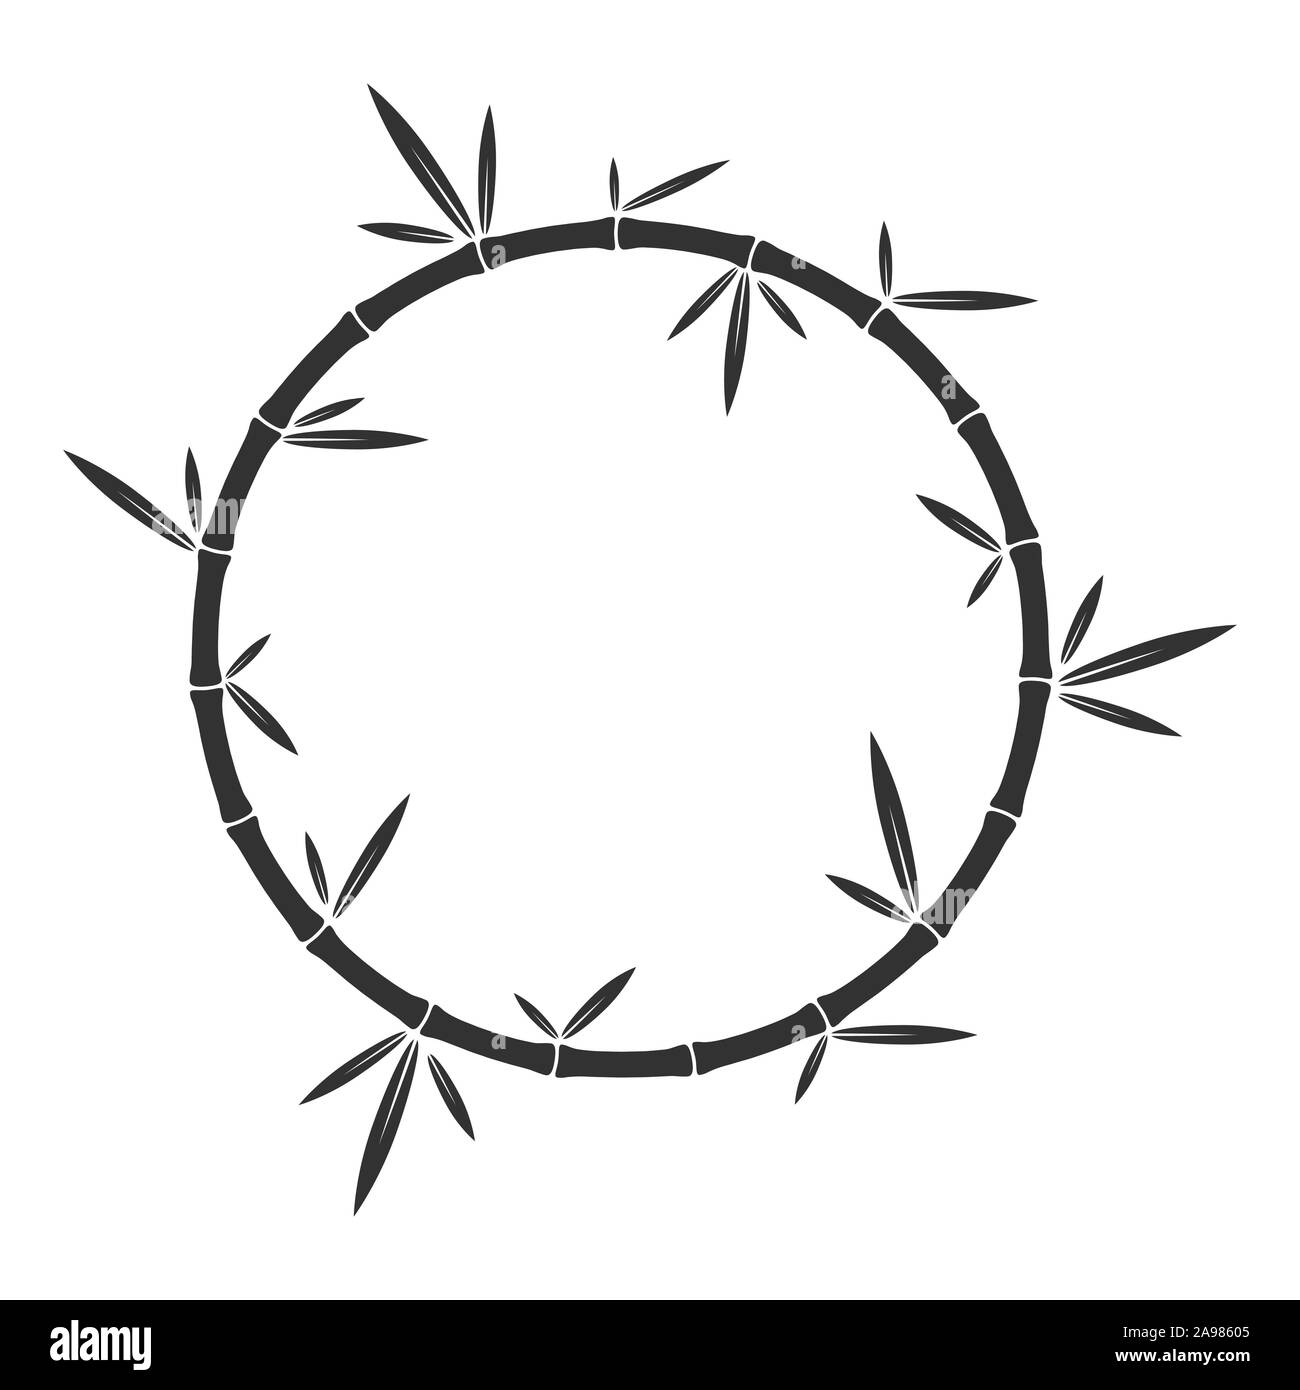 Vector bamboo round frame. Bamboo stalks and leaves. Black design element isolated. Stock Vector